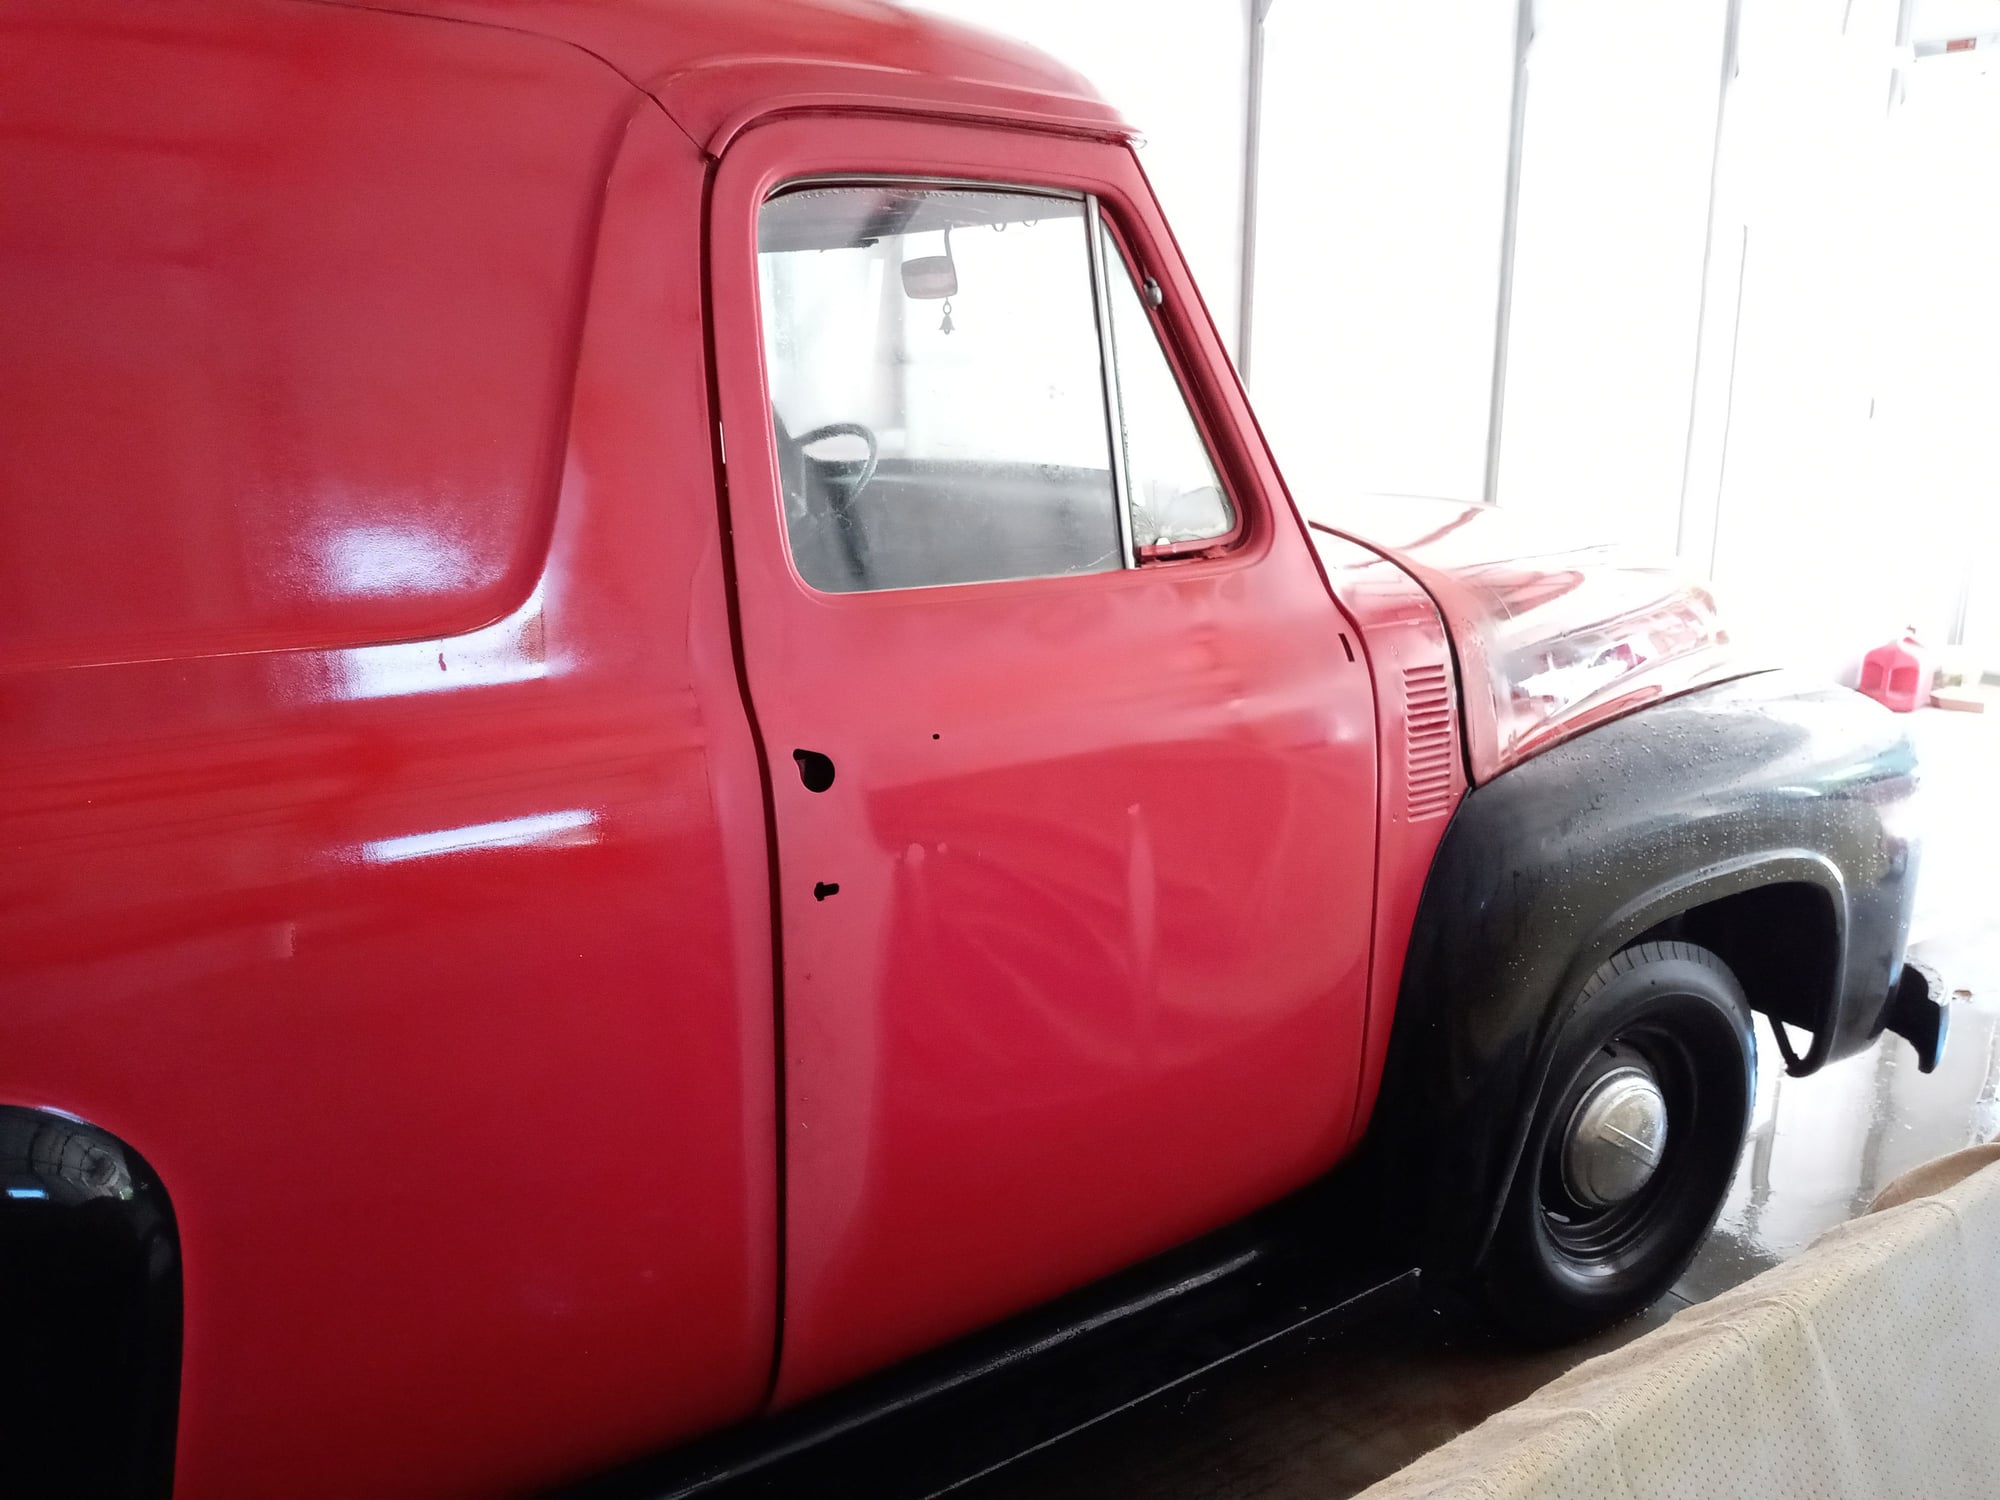 1955 Ford F-100 - 1955 Ford F100 Panel truck for sale - Used - VIN F10D5U18902 - 13,609 Miles - 6 cyl - 2WD - Automatic - Truck - Red - West Springfield, MA 01089, United States